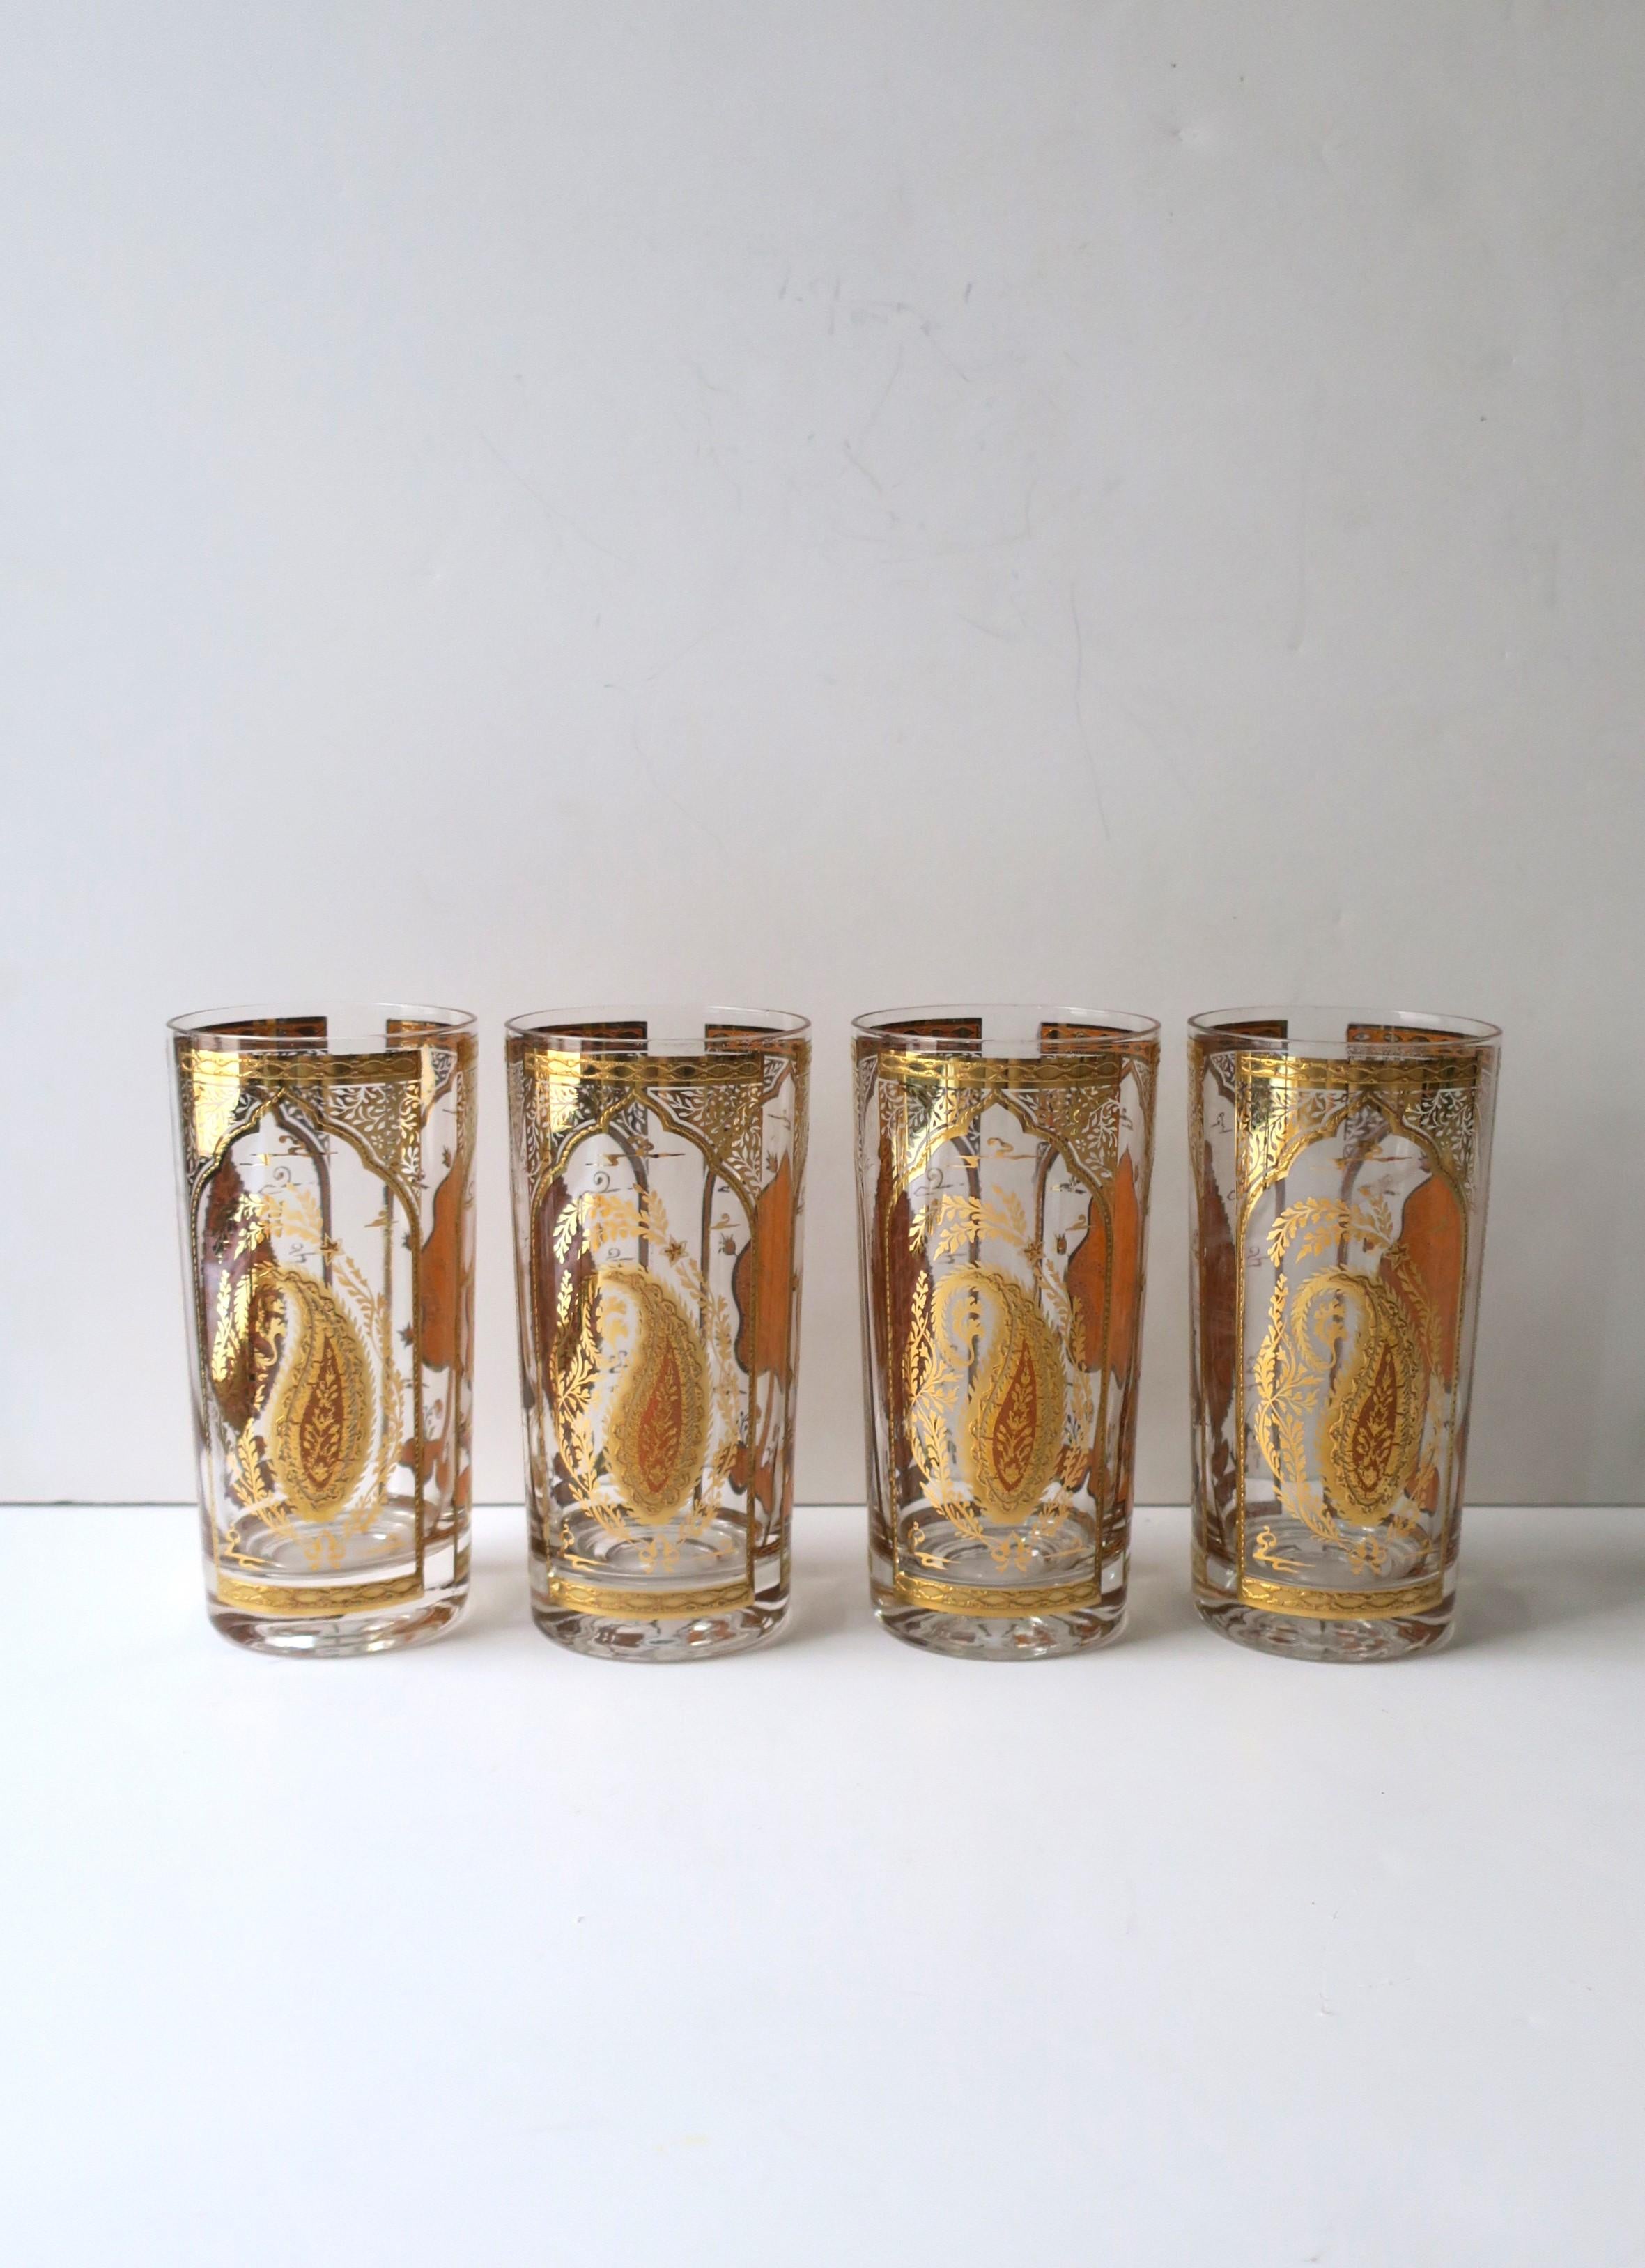 Moorish Gold Paisley Moroccan Highball Cocktail Glasses by Culver, Set of 4 For Sale